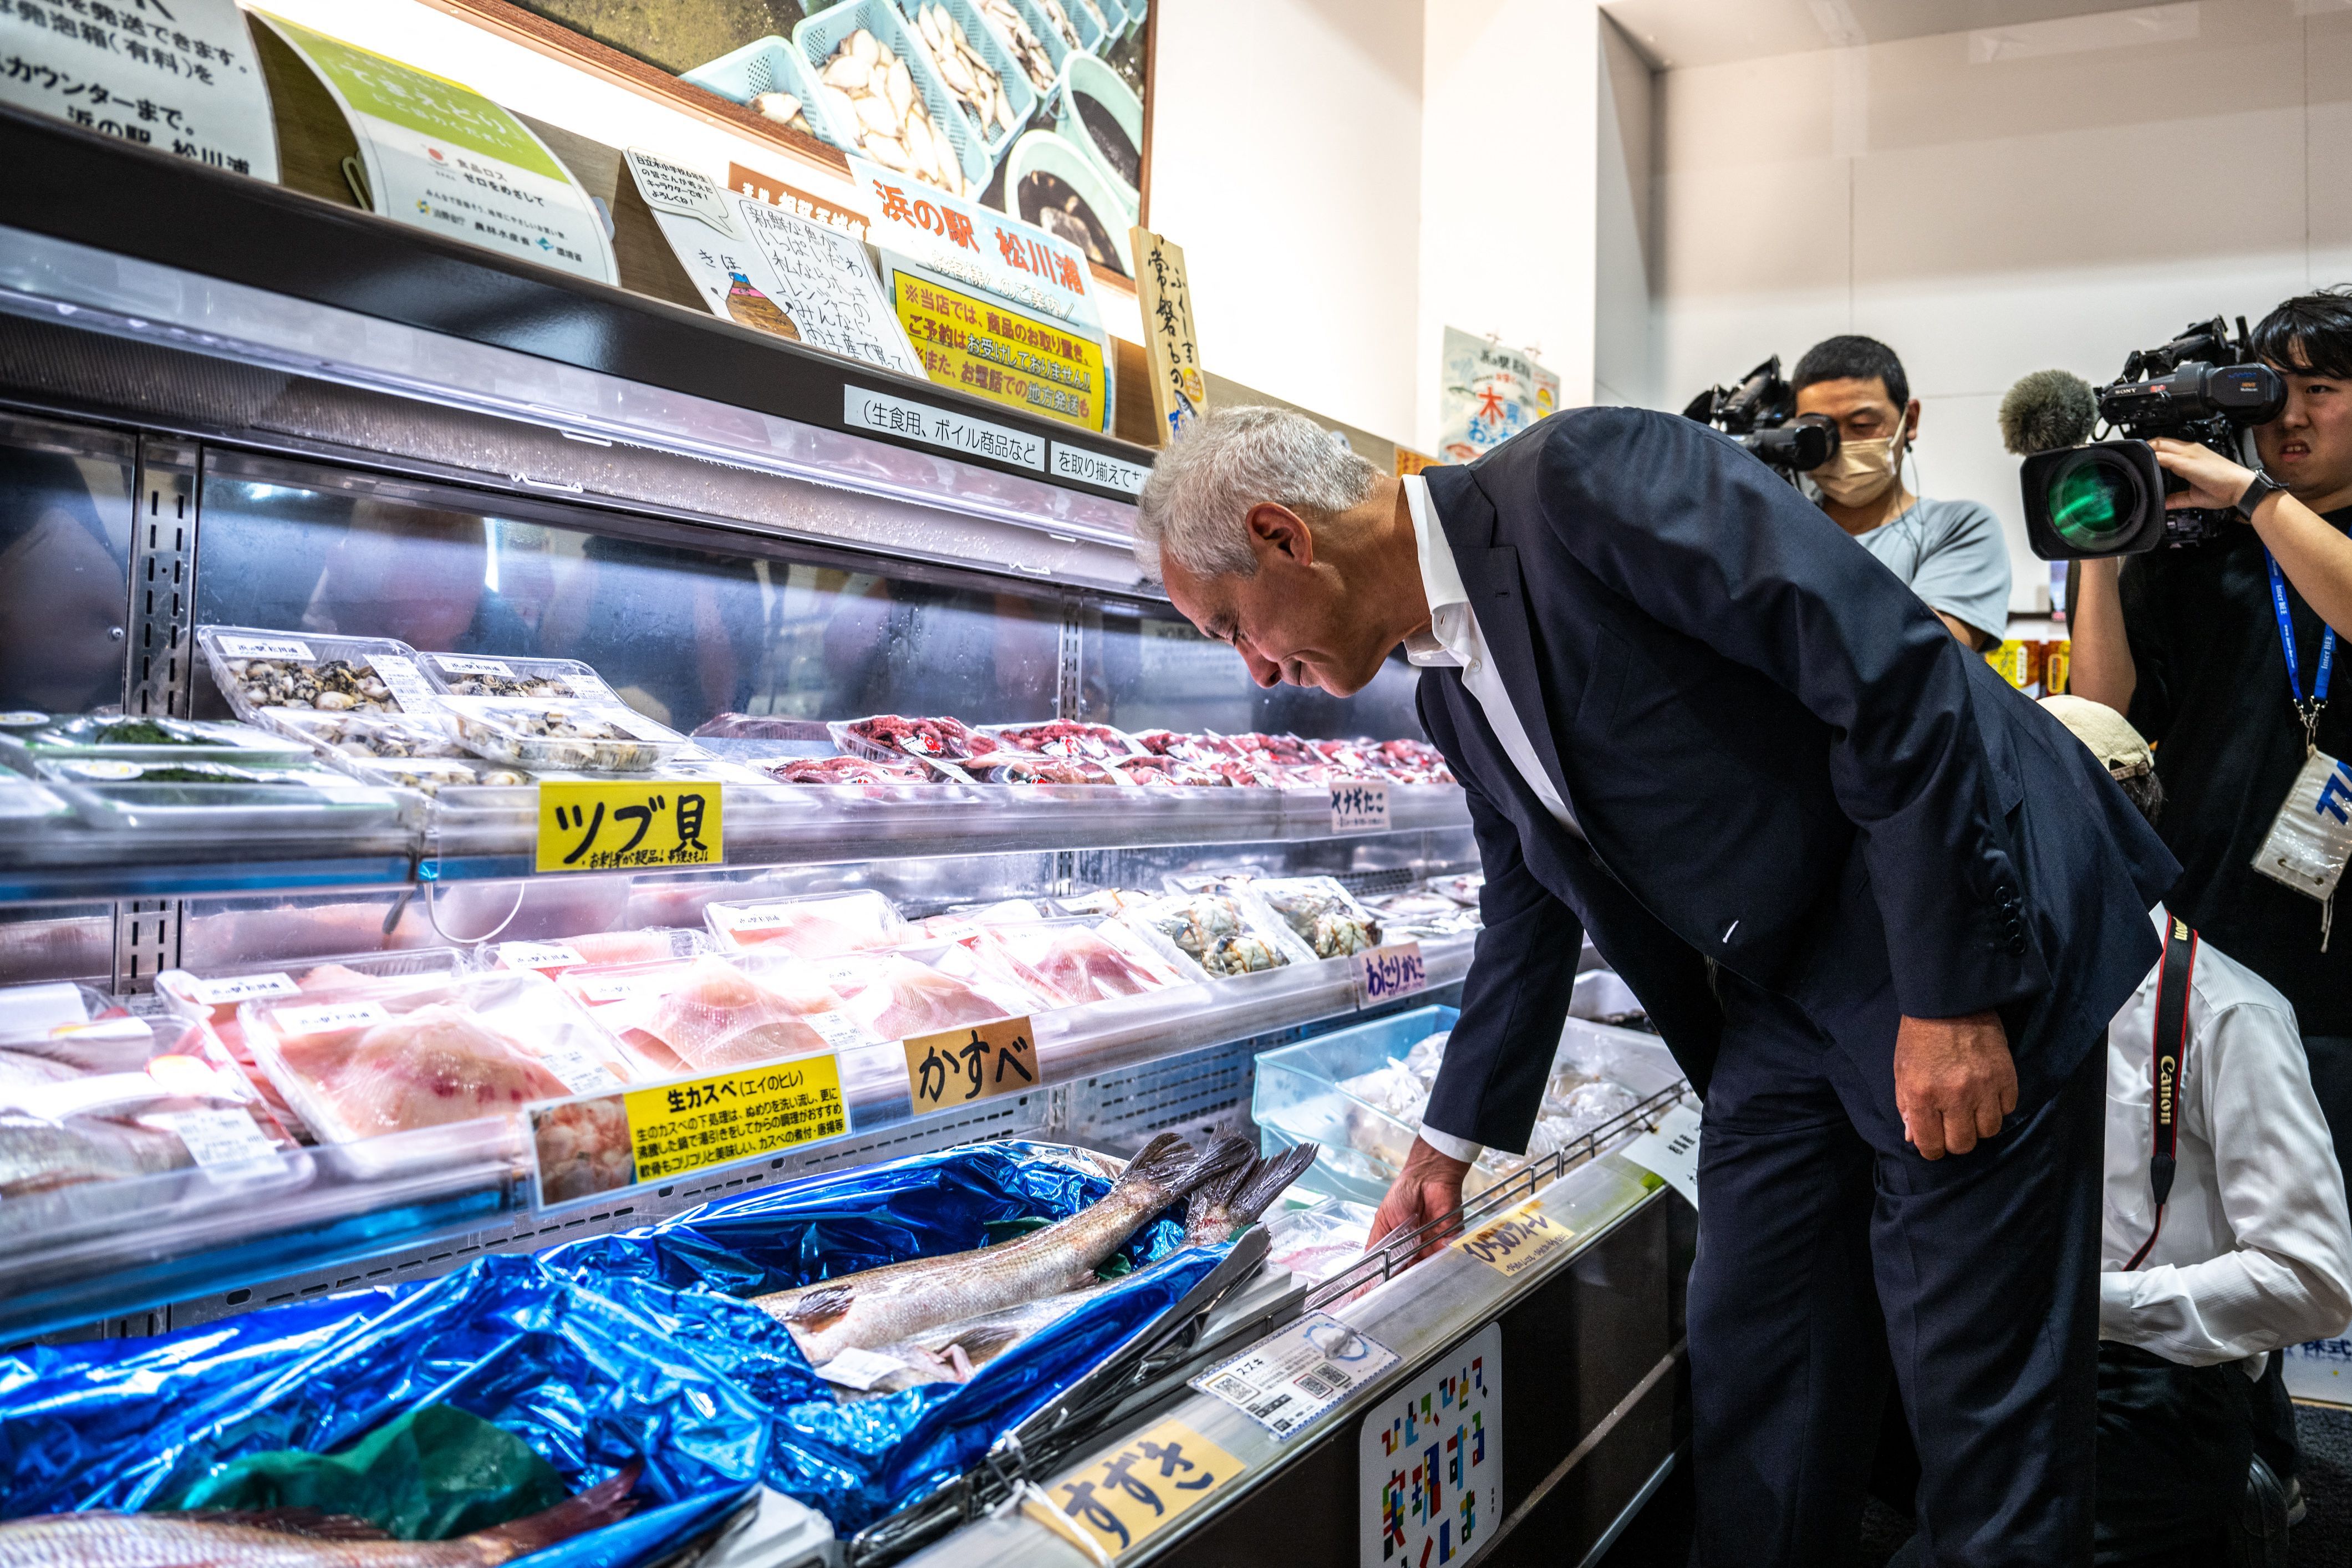 Rahm Emanuel visits Hamanoeki Fish Market and Food Court, as part of his trip to Soma City in Fukushima Prefecture 